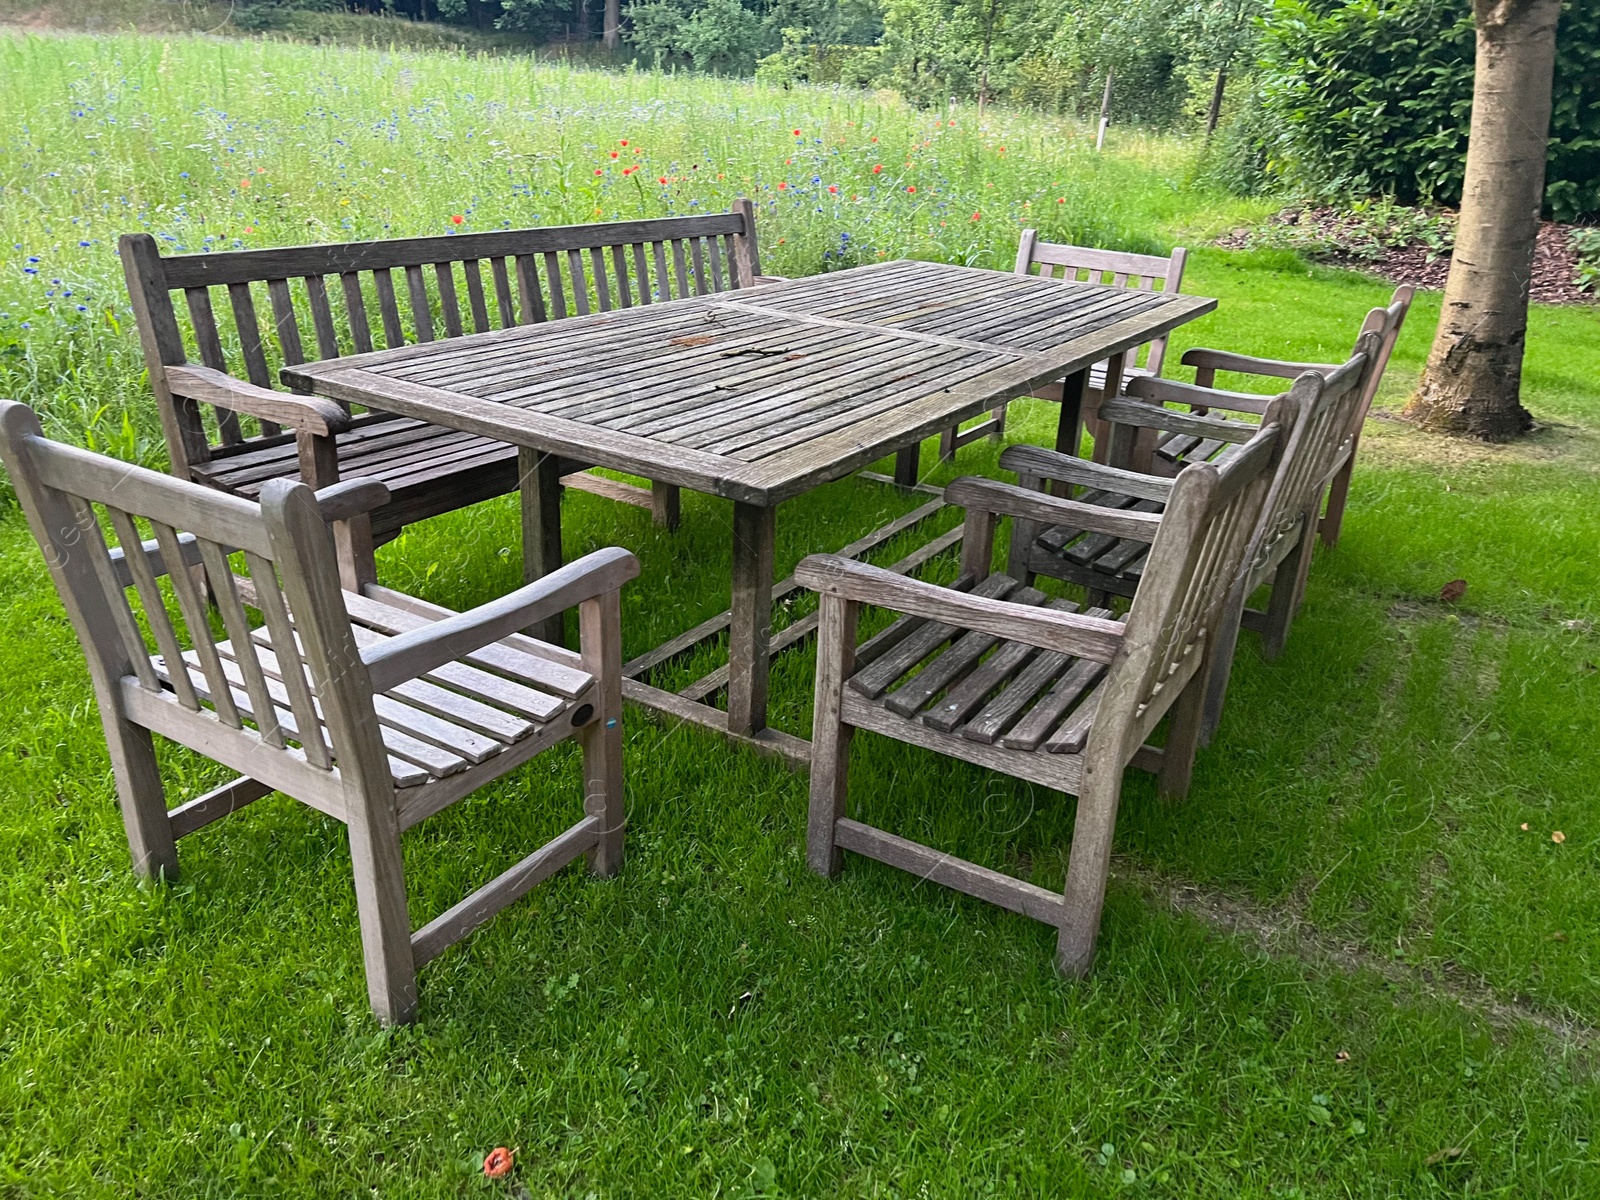 Photo of Wooden table with bench and chairs in garden. Landscape design